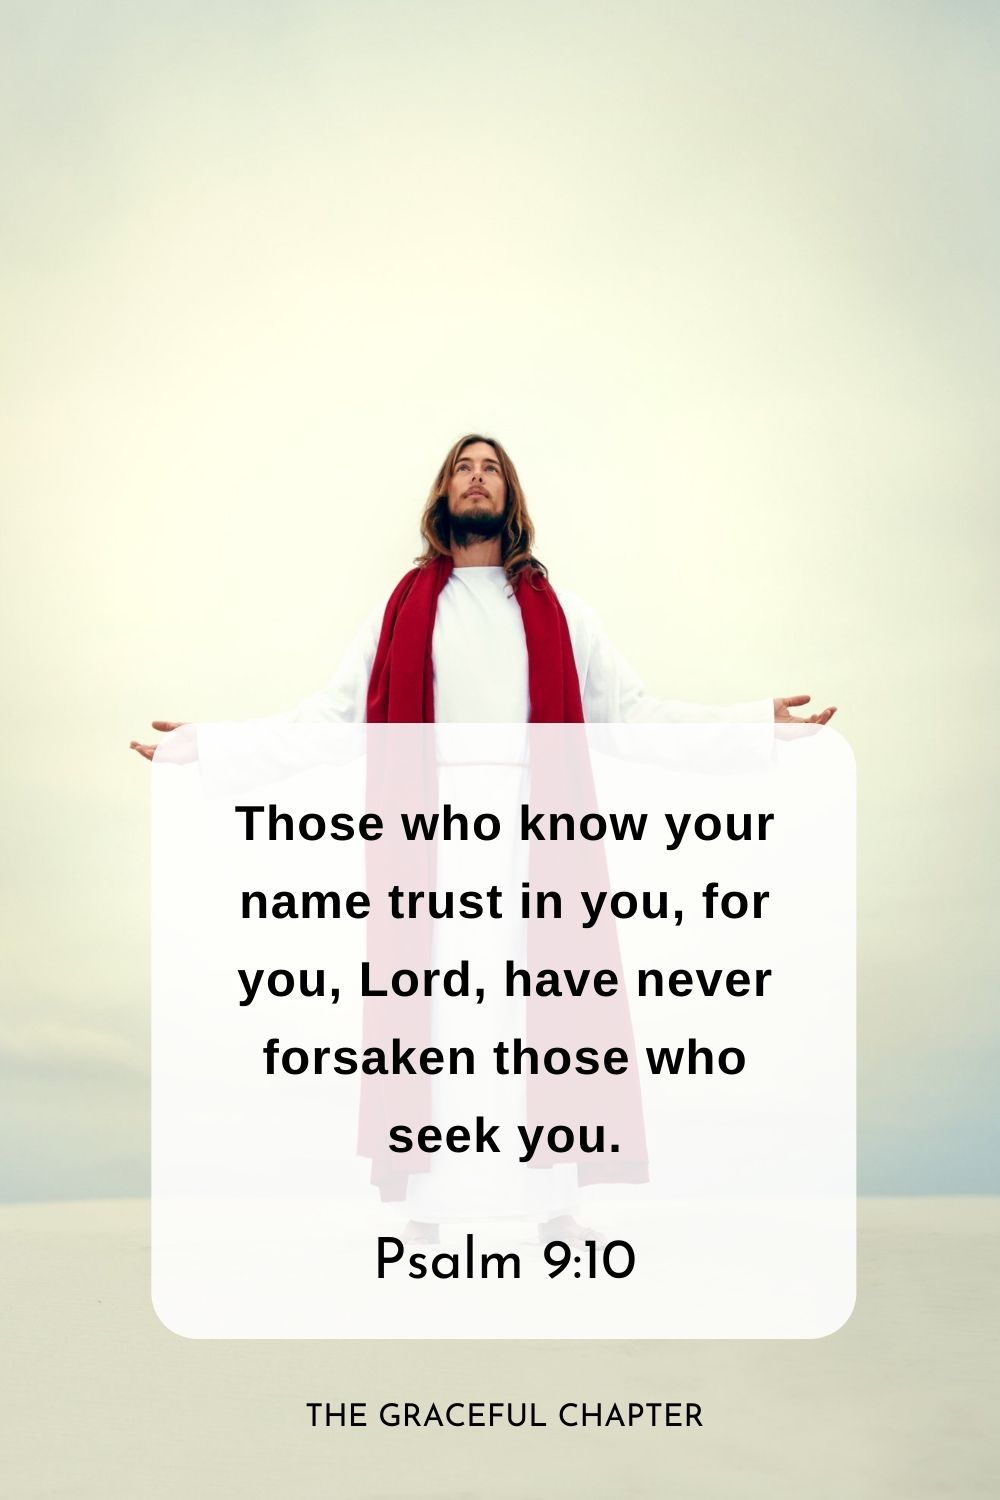 Those who know your name trust in you, for you, Lord, have never forsaken those who seek you. bible verses about trusting God